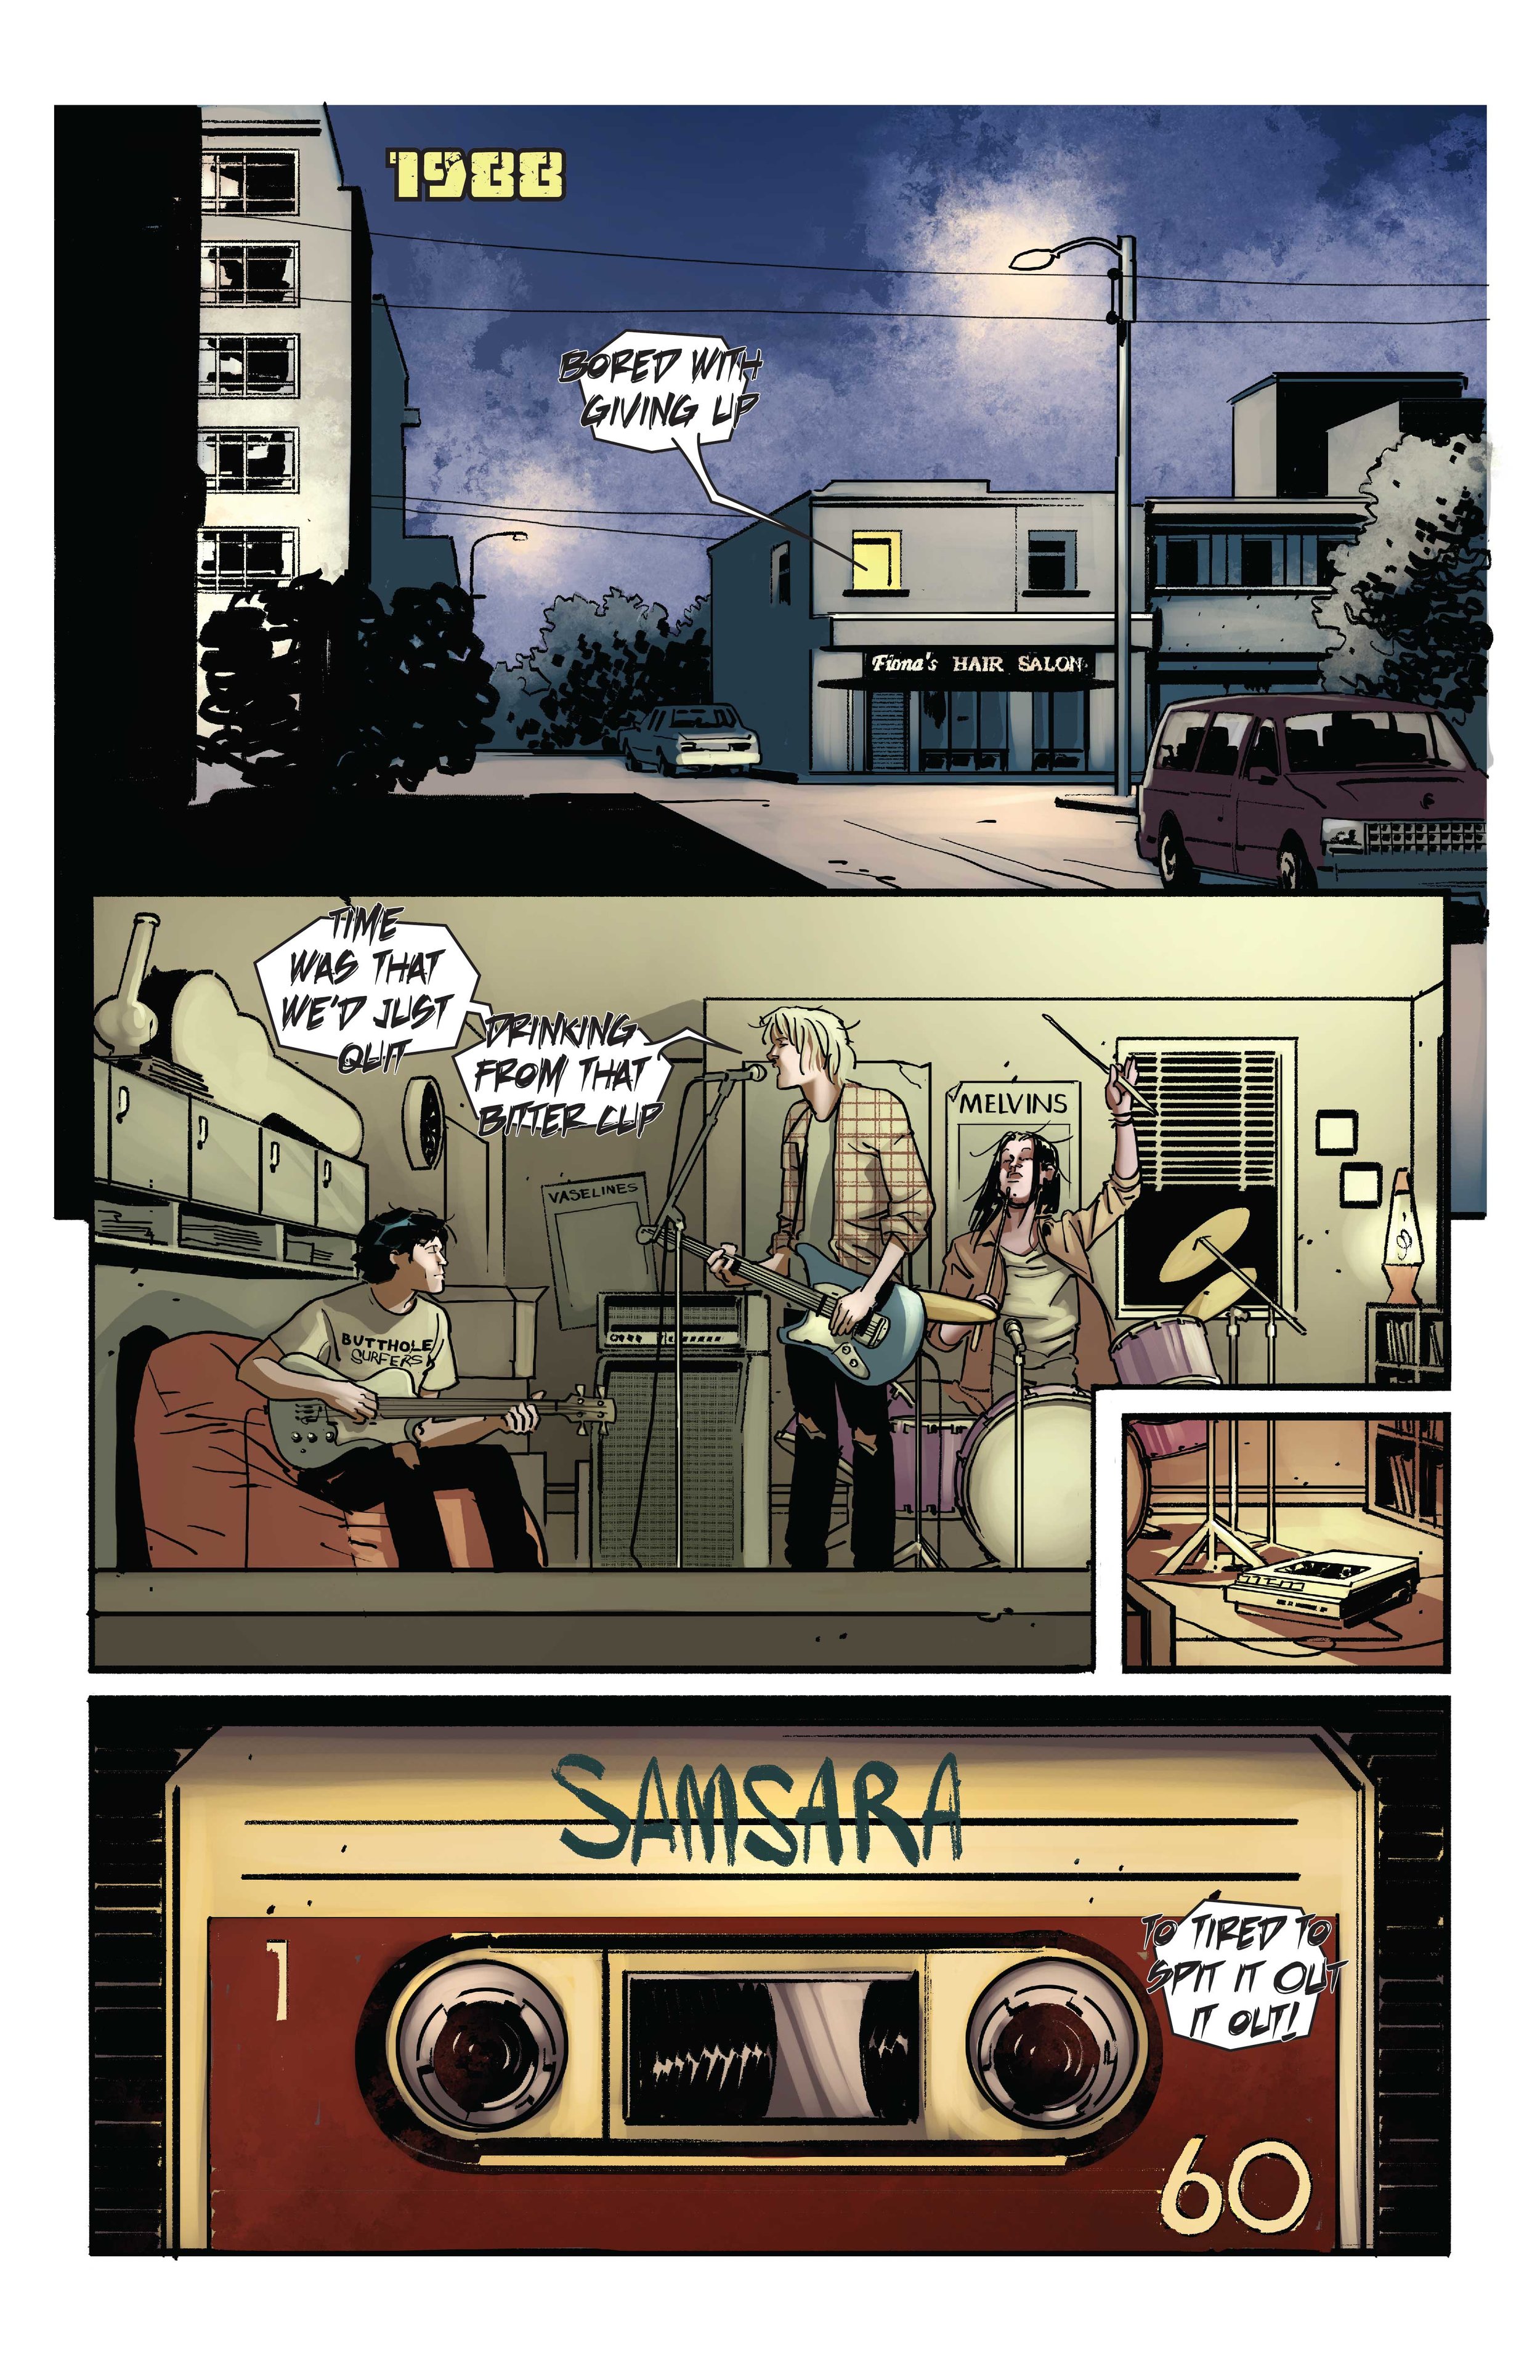 Skip-to-the-End-Page1-Jeremy-Holt-Comic-Book-Author.jpg